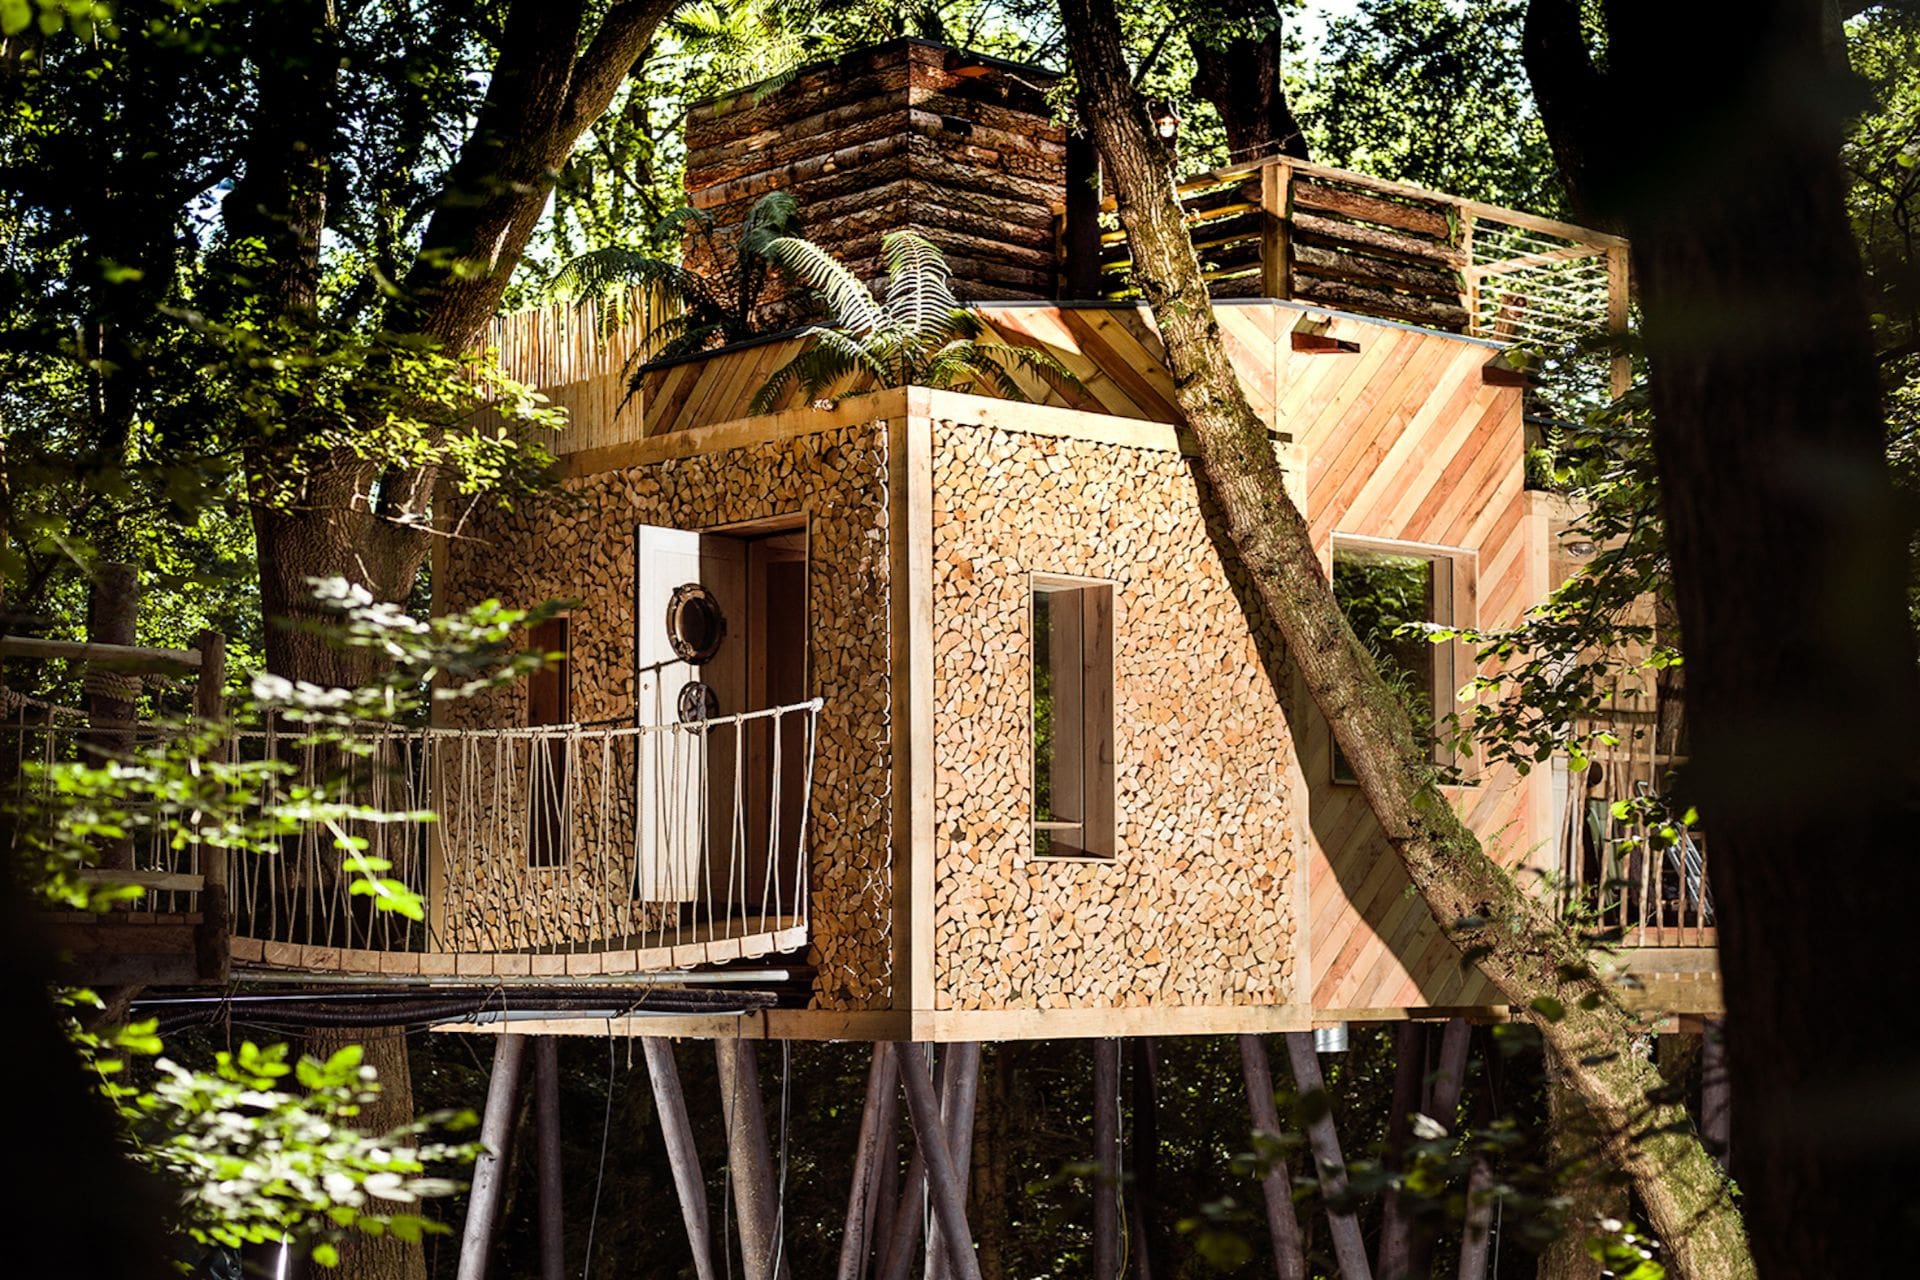 beautiful-luxury-treehouse-set-in-forest-with-a-rope-bridge-the-woodsmans-treehouse-crafty-camping-holditch-dorset-treehouse-holidays-uk-with-hot-tub